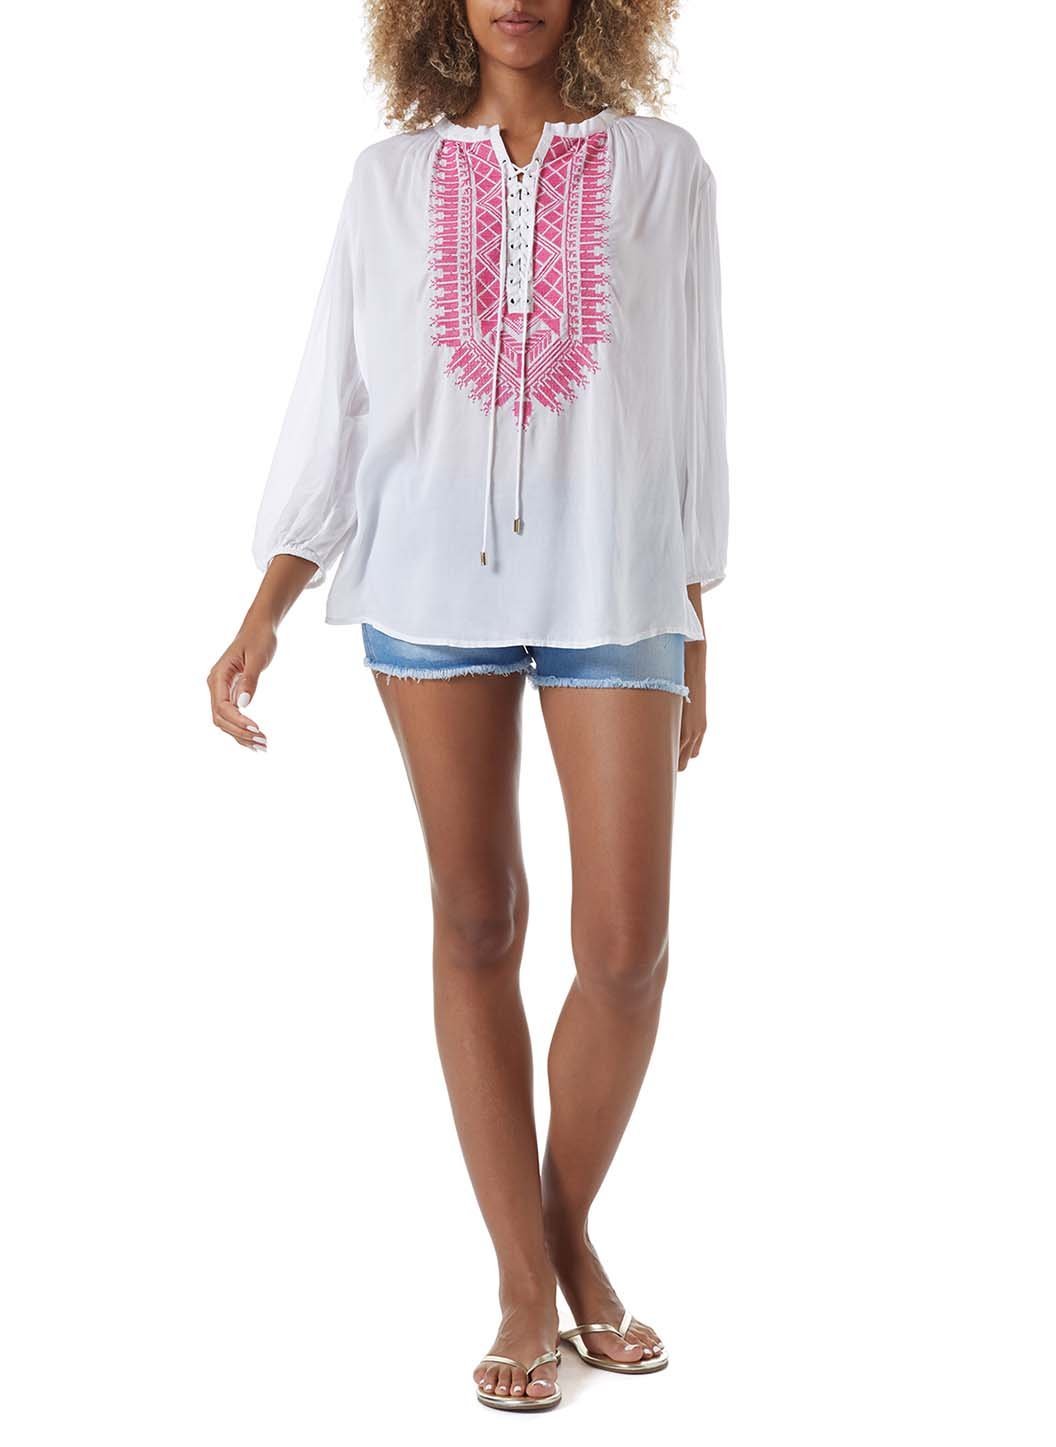 simona white hot pink embroidered top model_F